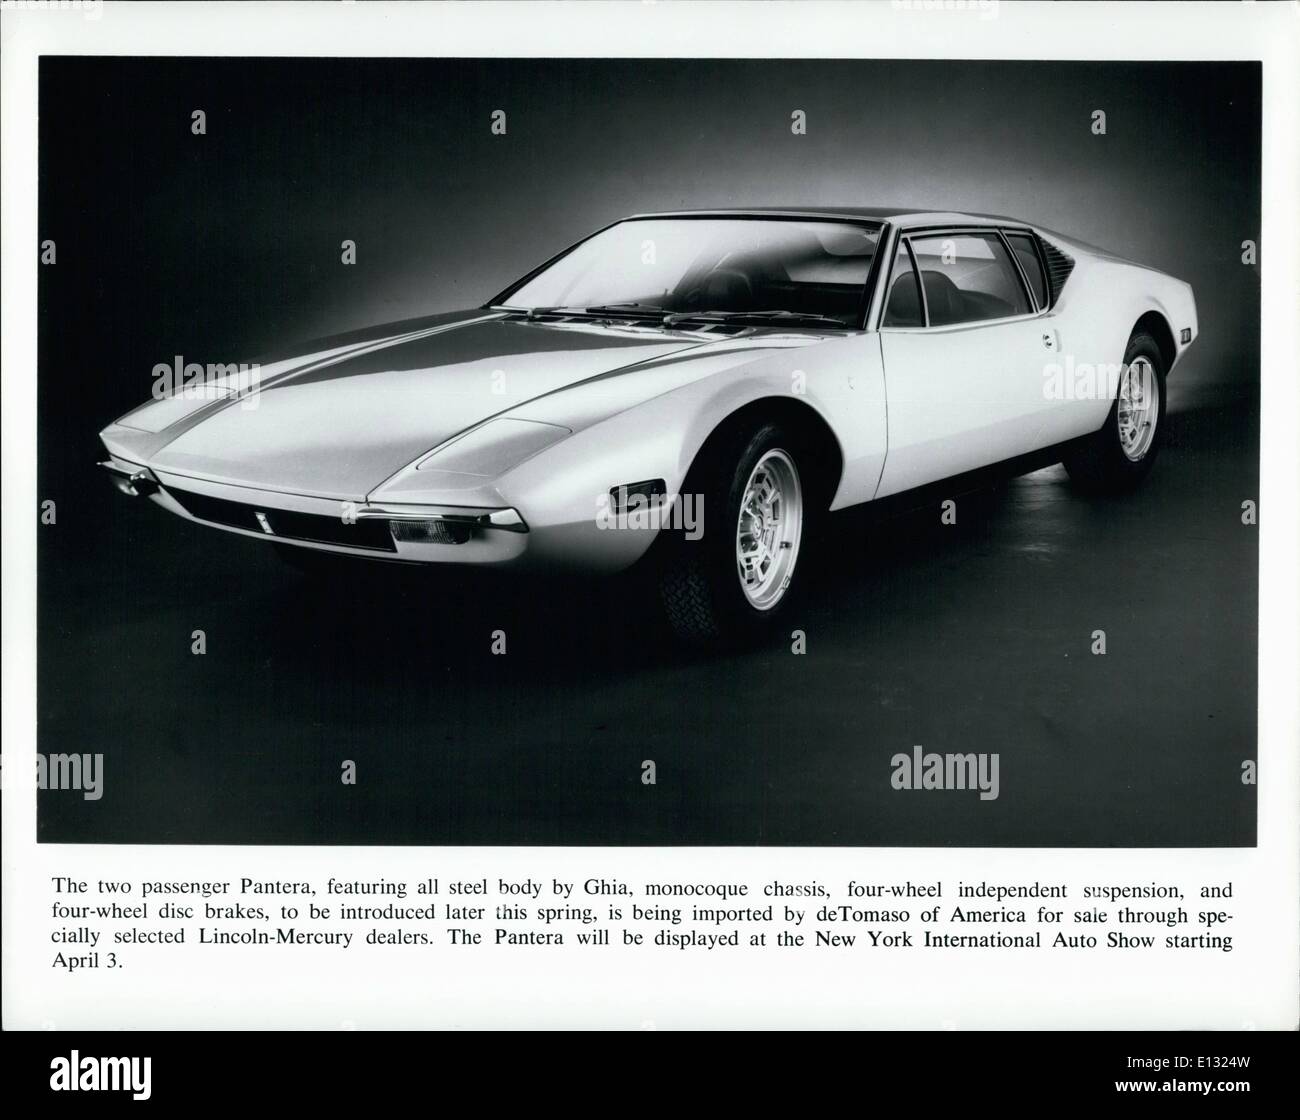 Feb. 26, 2012 - The two passenger Pantera, featuring all steel body by Ghia, monocoque chassis, four-wheel independent suspension, and four-wheel disc brakes, to be introduced later this spring, is being imported by deTomaso of America for sale through specially selected Lincoln-Mercury dealers. The Pantera will be displayed at the New York International Auto Show starting April 3. Stock Photo